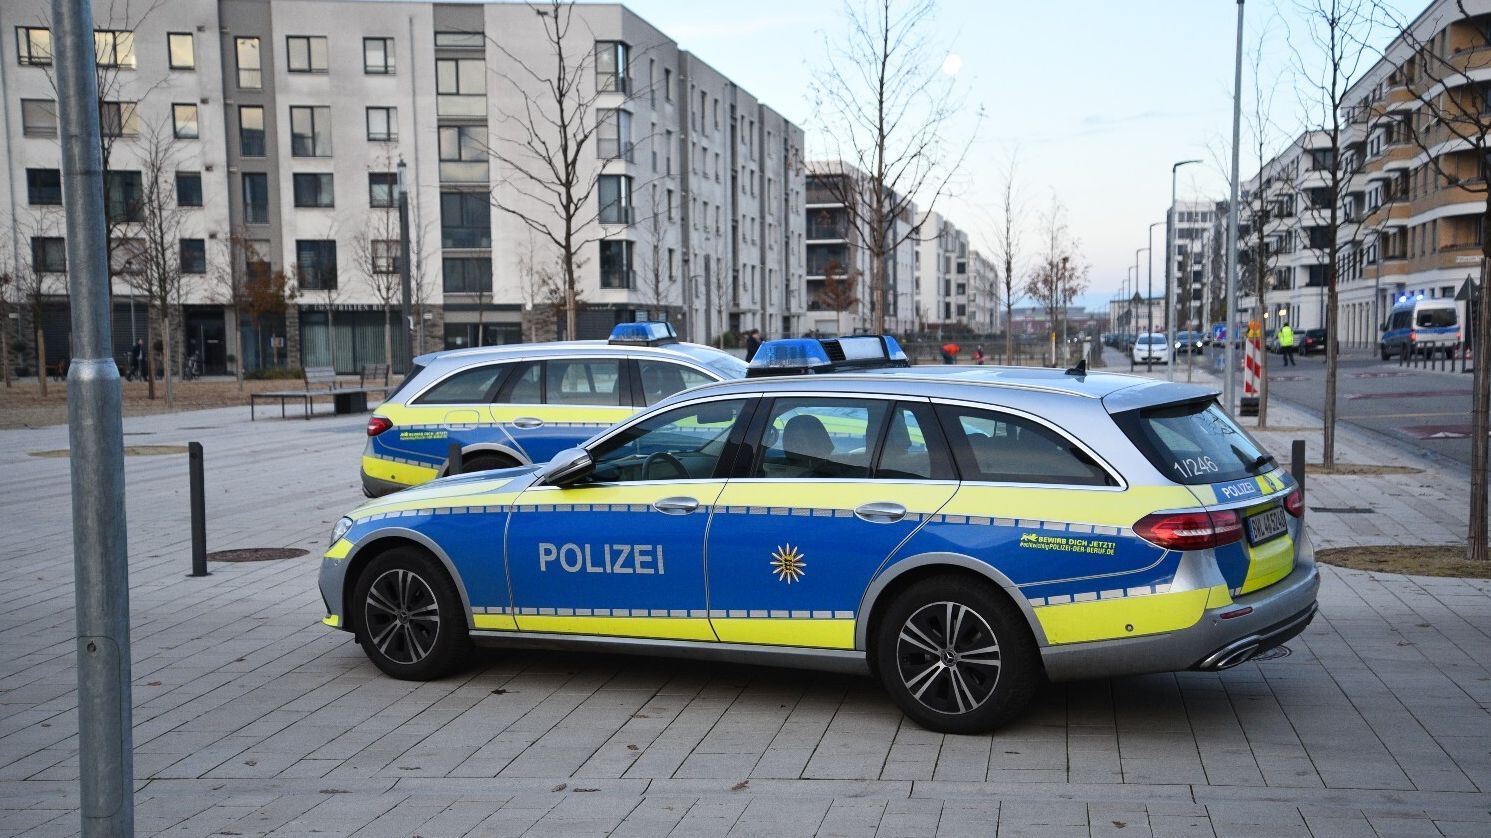 German Police evacuate a shopping mall in Dresden for a hostage taking